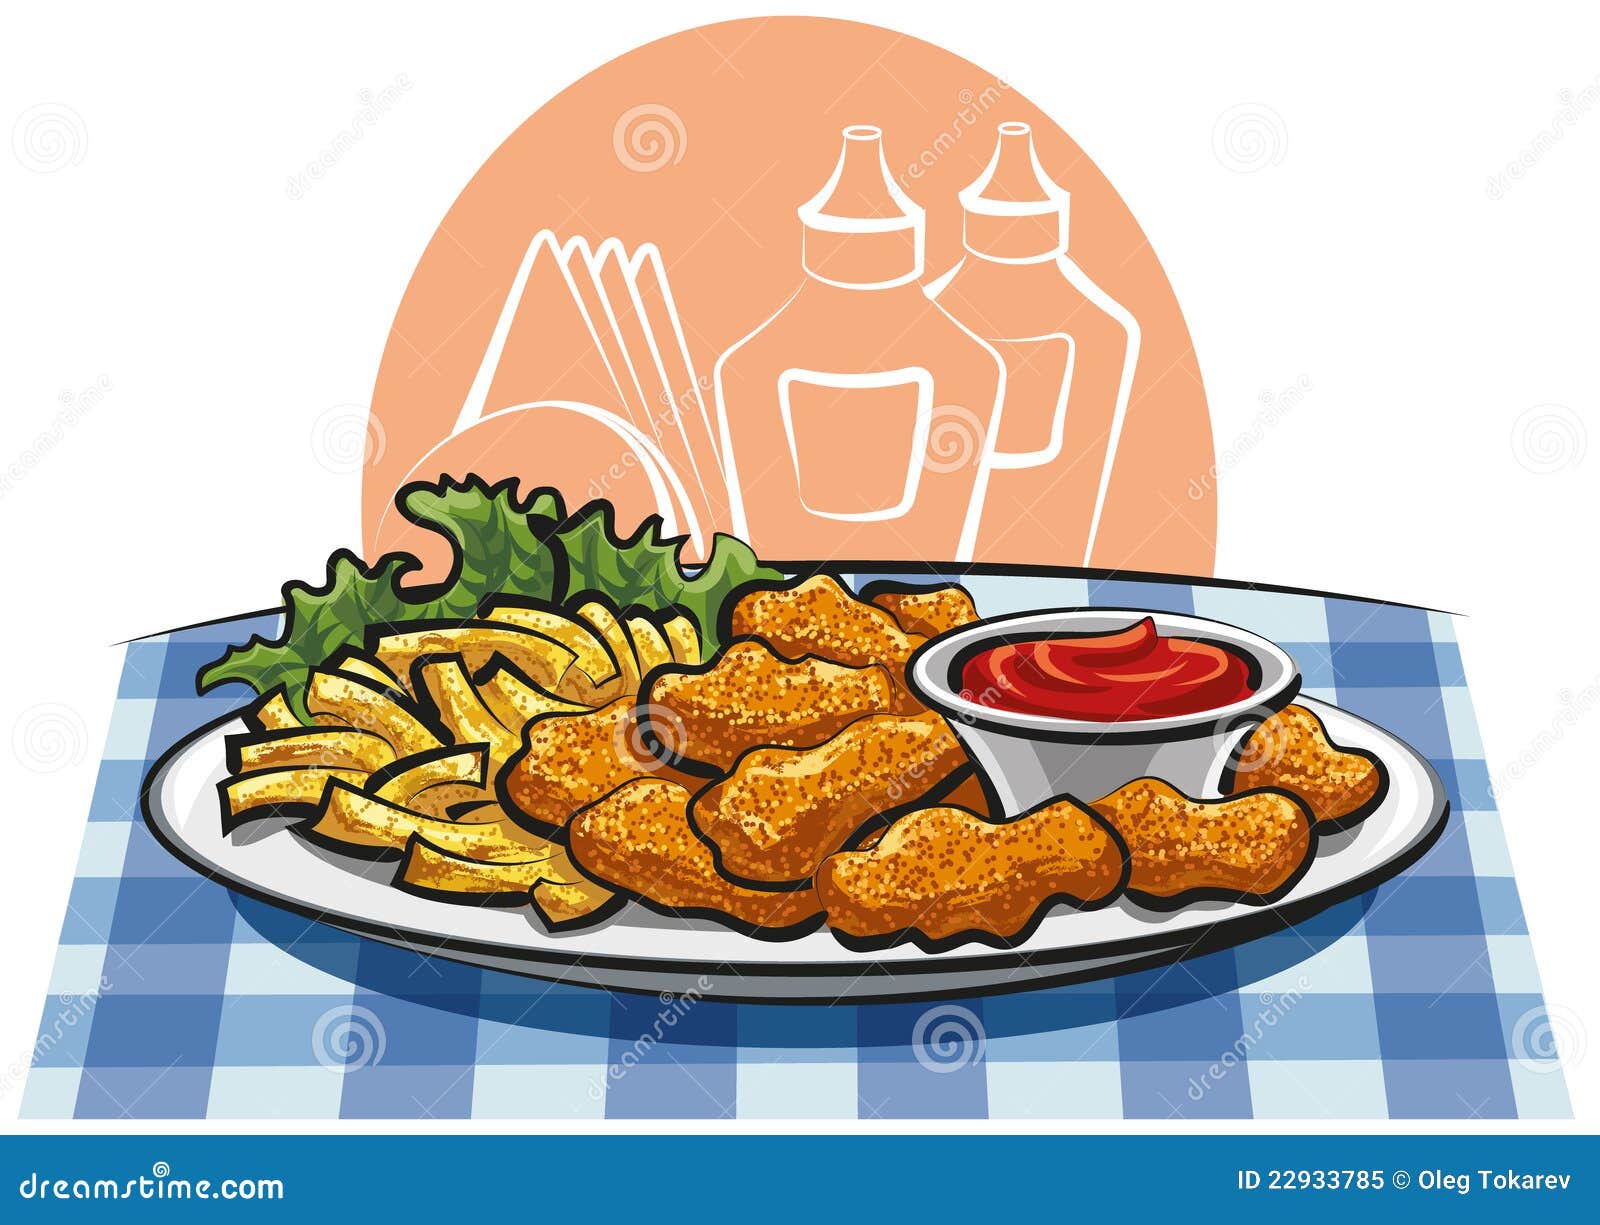 clipart chicken nuggets - photo #20